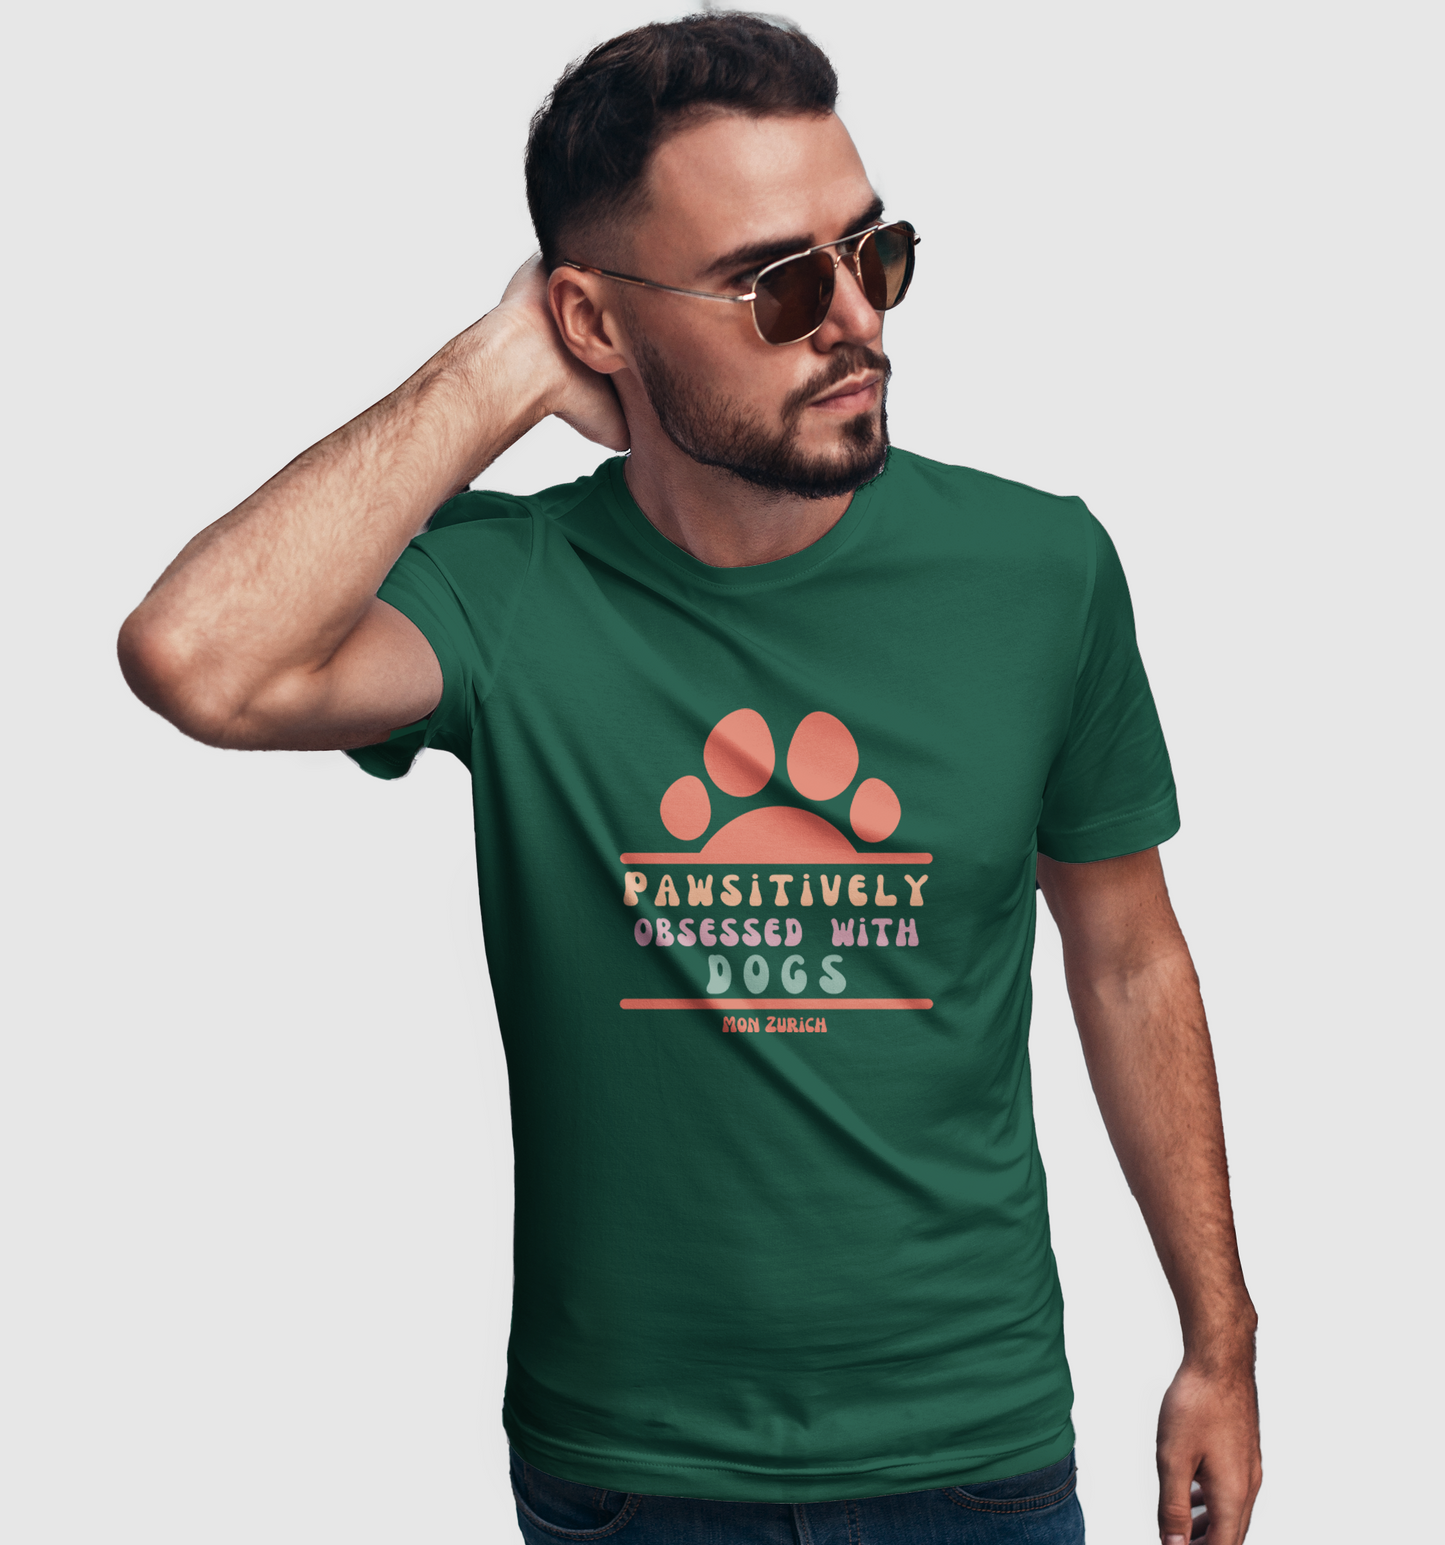 Pawsitively Obsessed With Dogs T-Shirt In Dark - Mon Zurich Originals